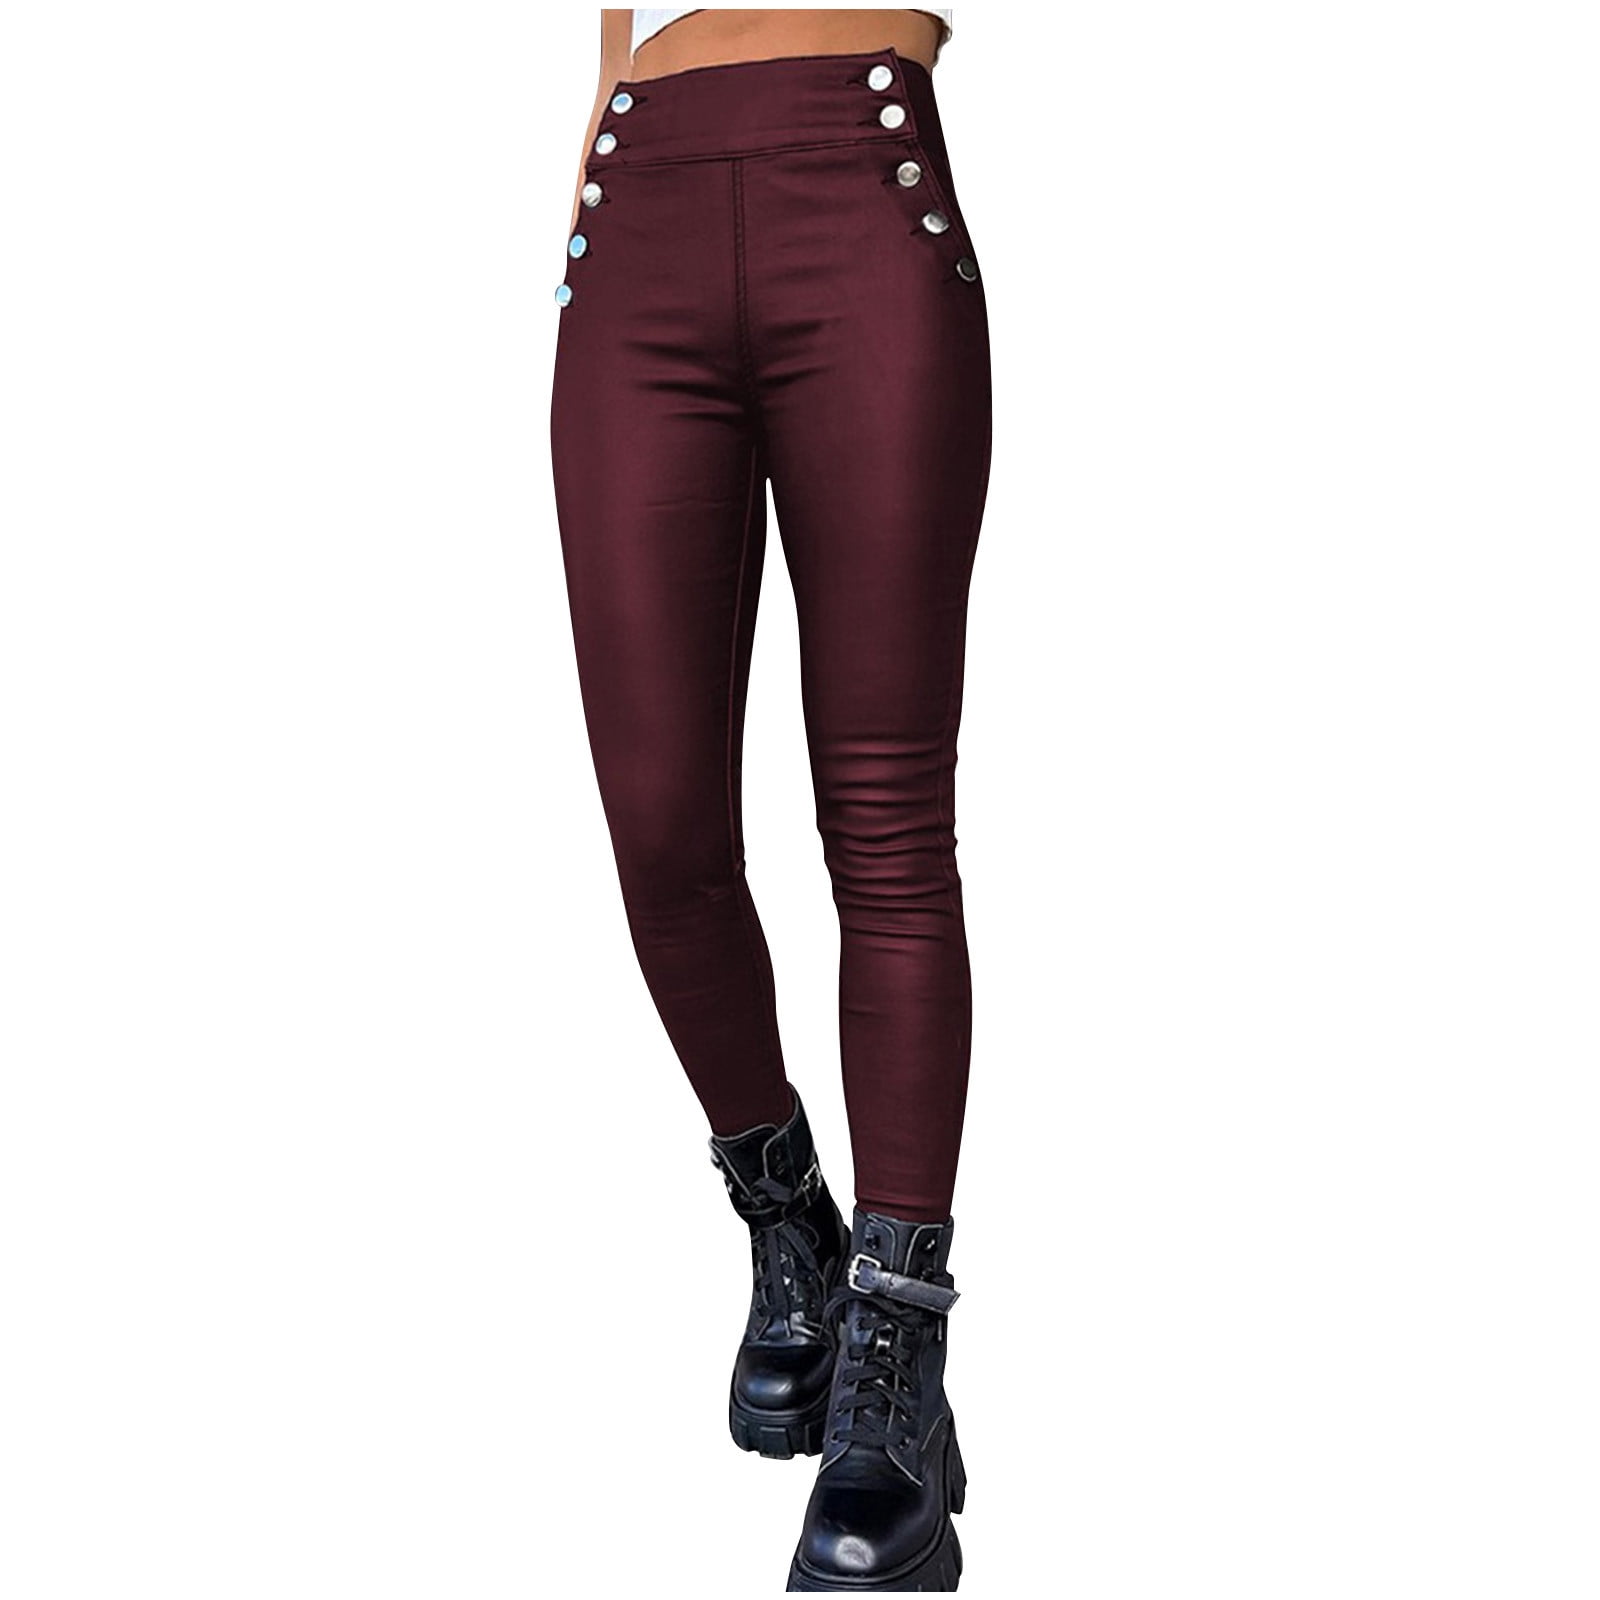 YYDGH Women's Faux Leather Skinny Pants Button Front High Waisted PU  Leather Leggings Pants Dark Blue L 